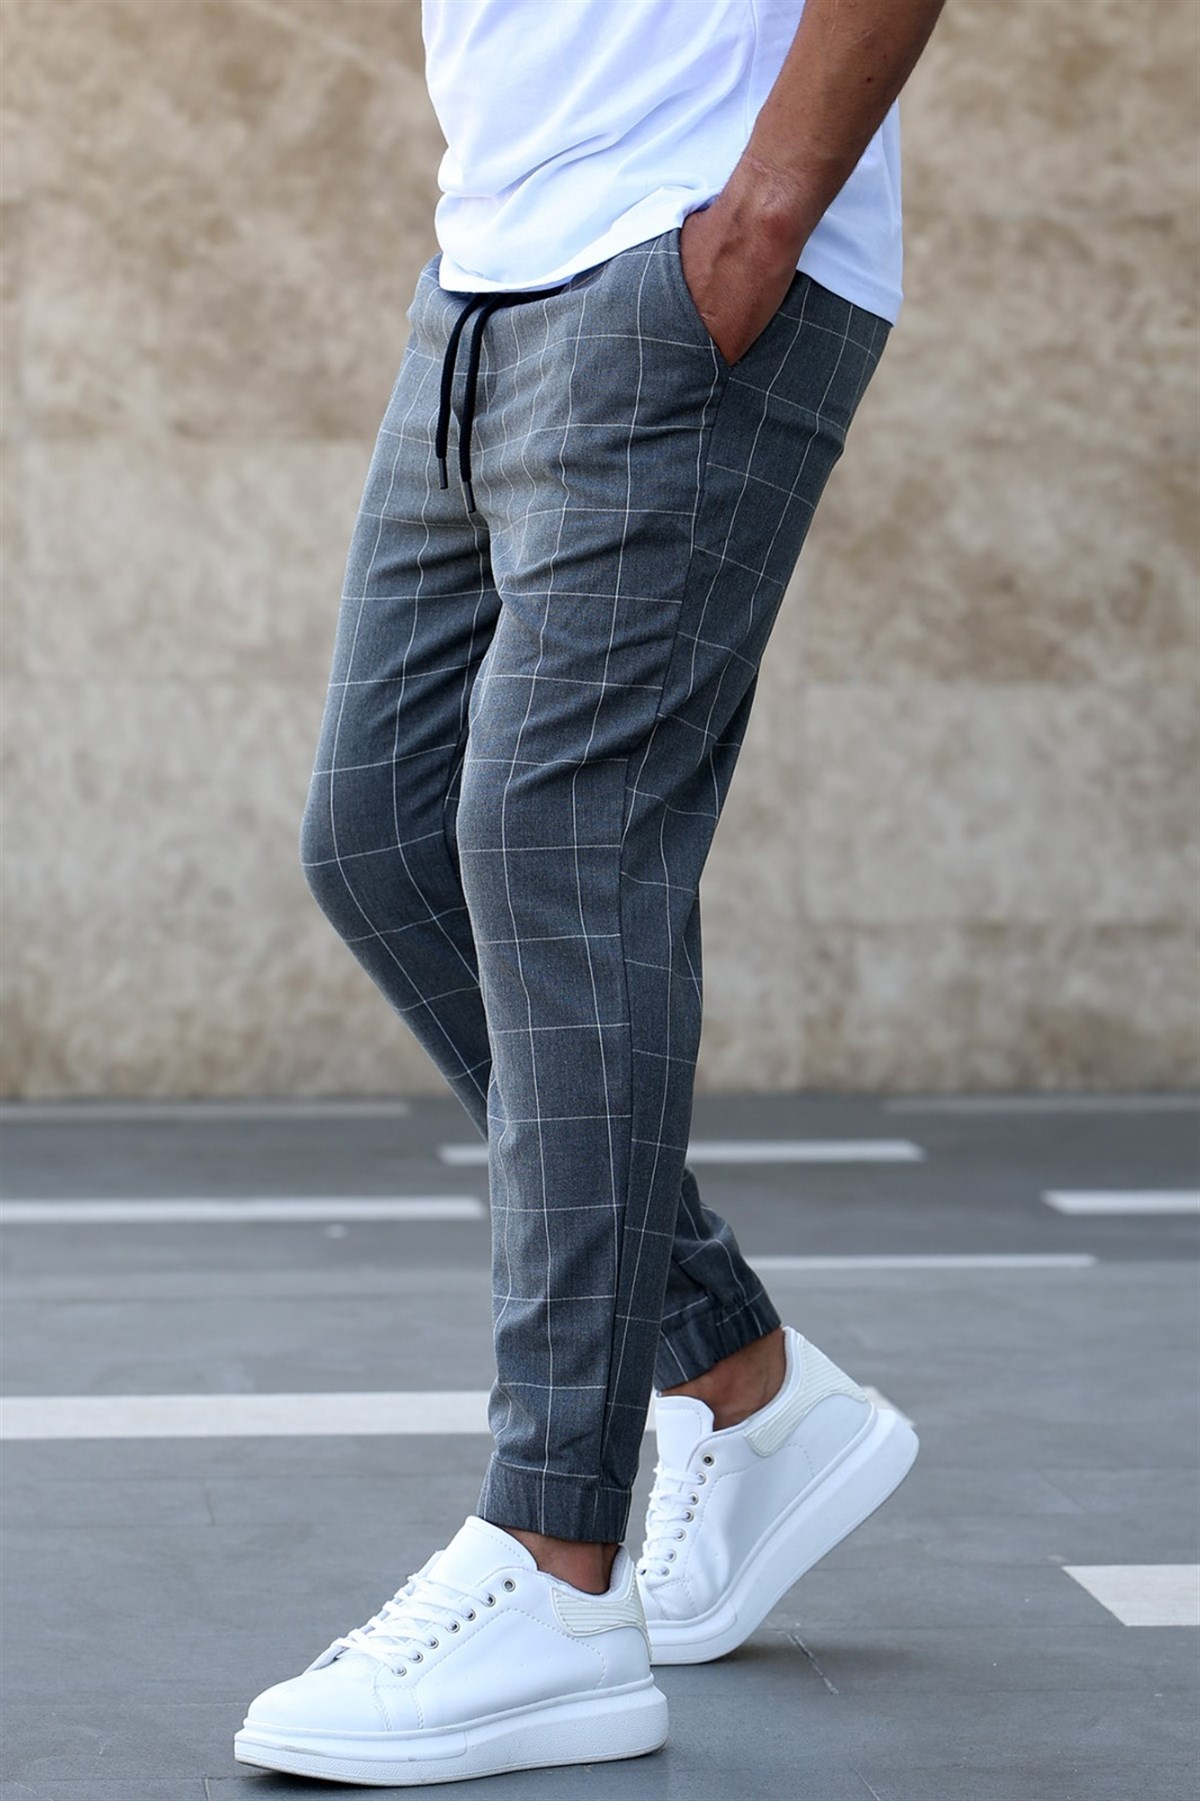 Men Tailored Trousers Suit Pants Check Plaid Western Style Casual Slim  Black Grey Navy Office Business Wear | Wish